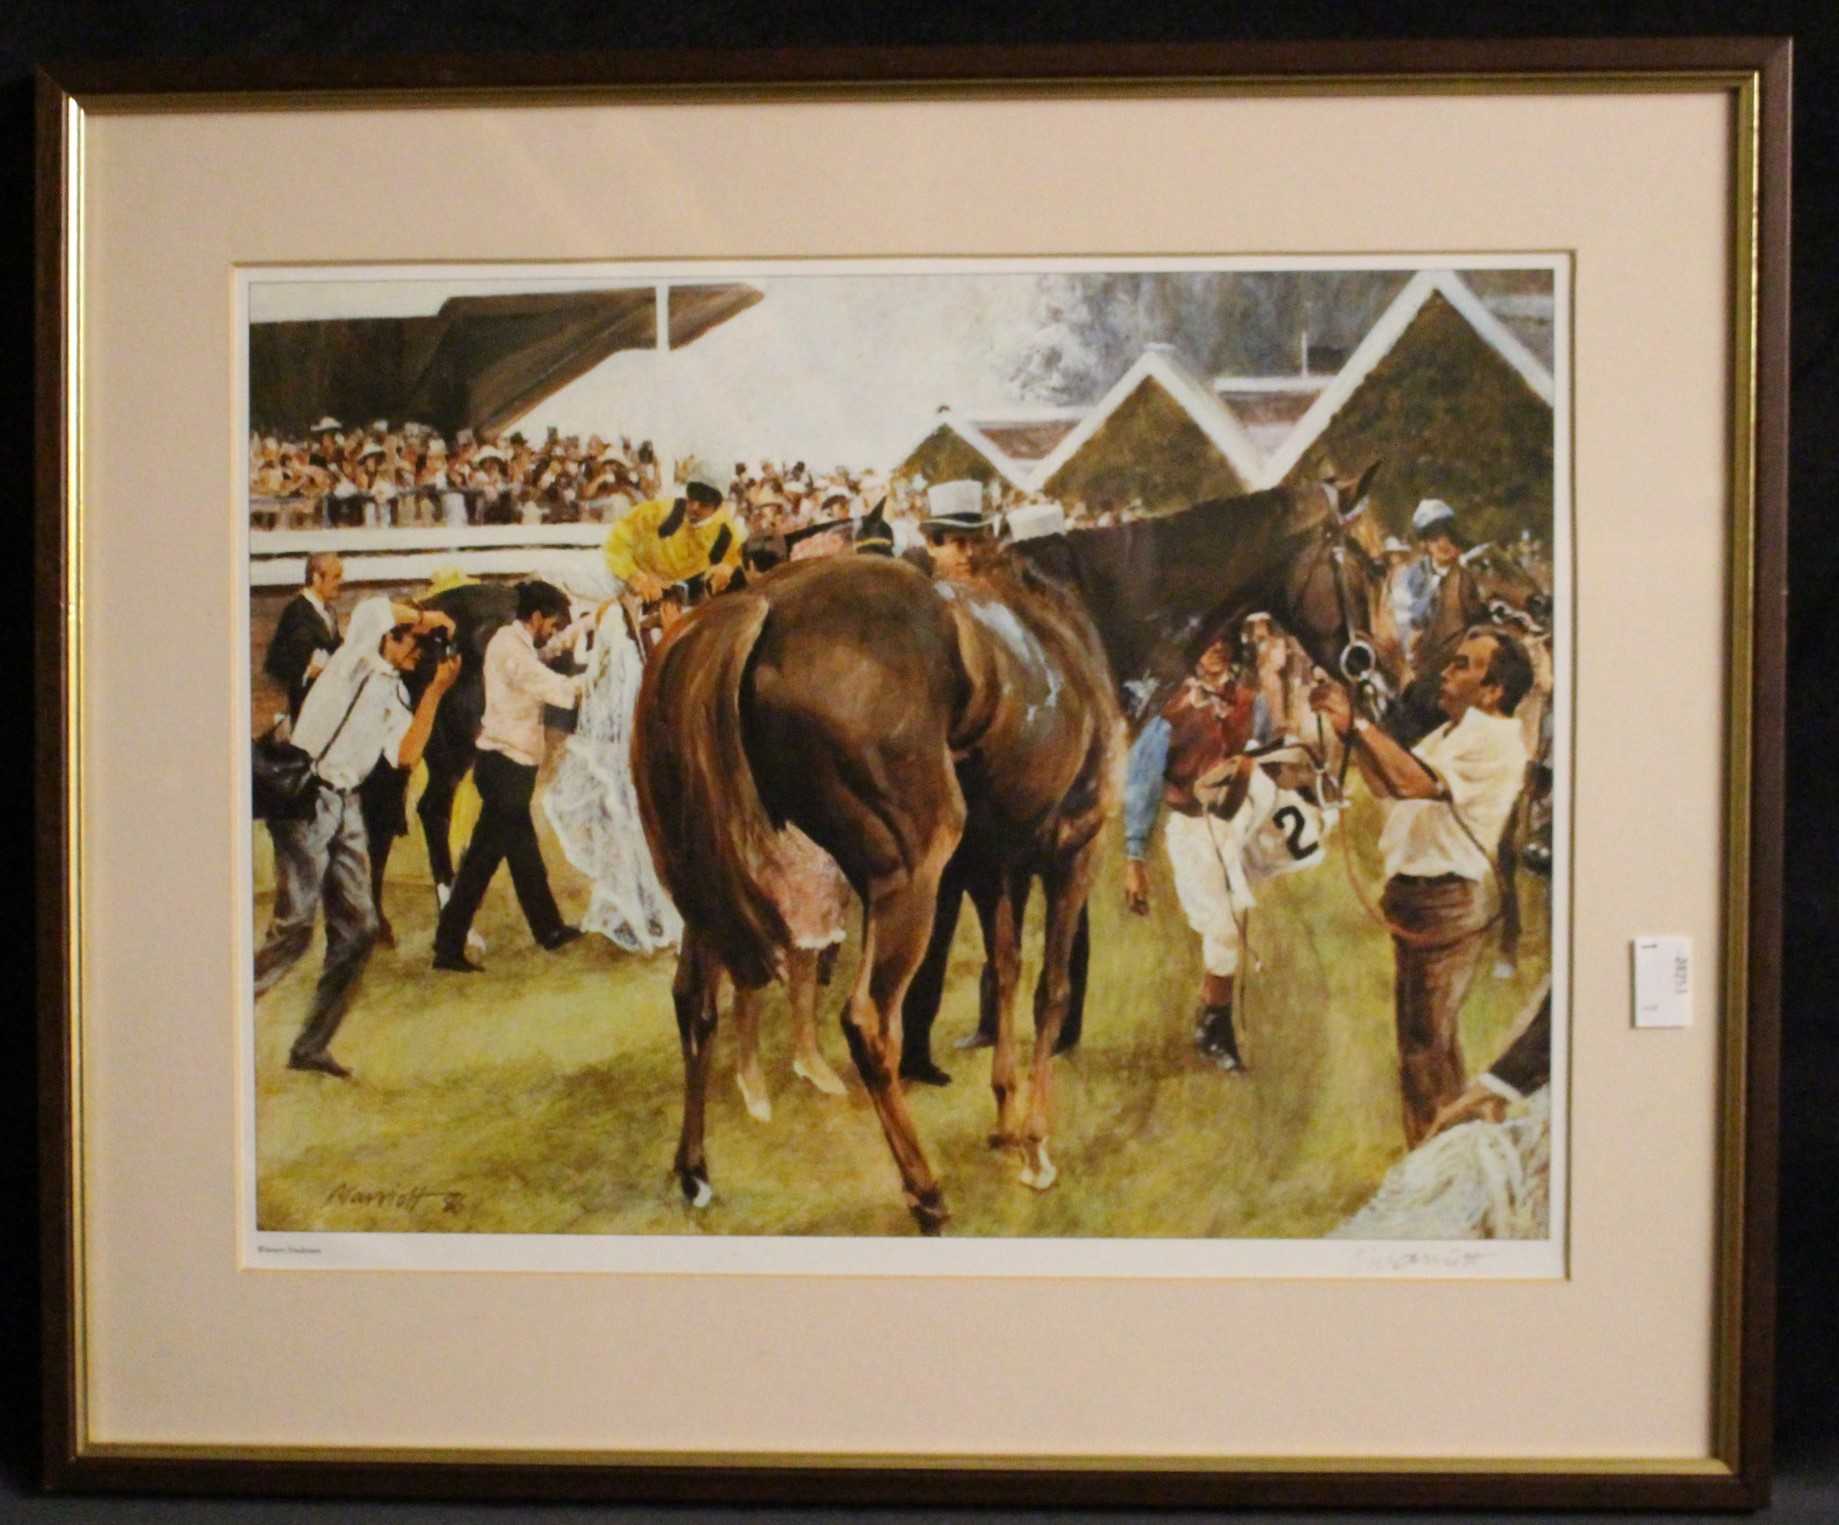 A set of six horse racing prints after Marriott "The Paddock", "Running Down", "The Gallops", "The